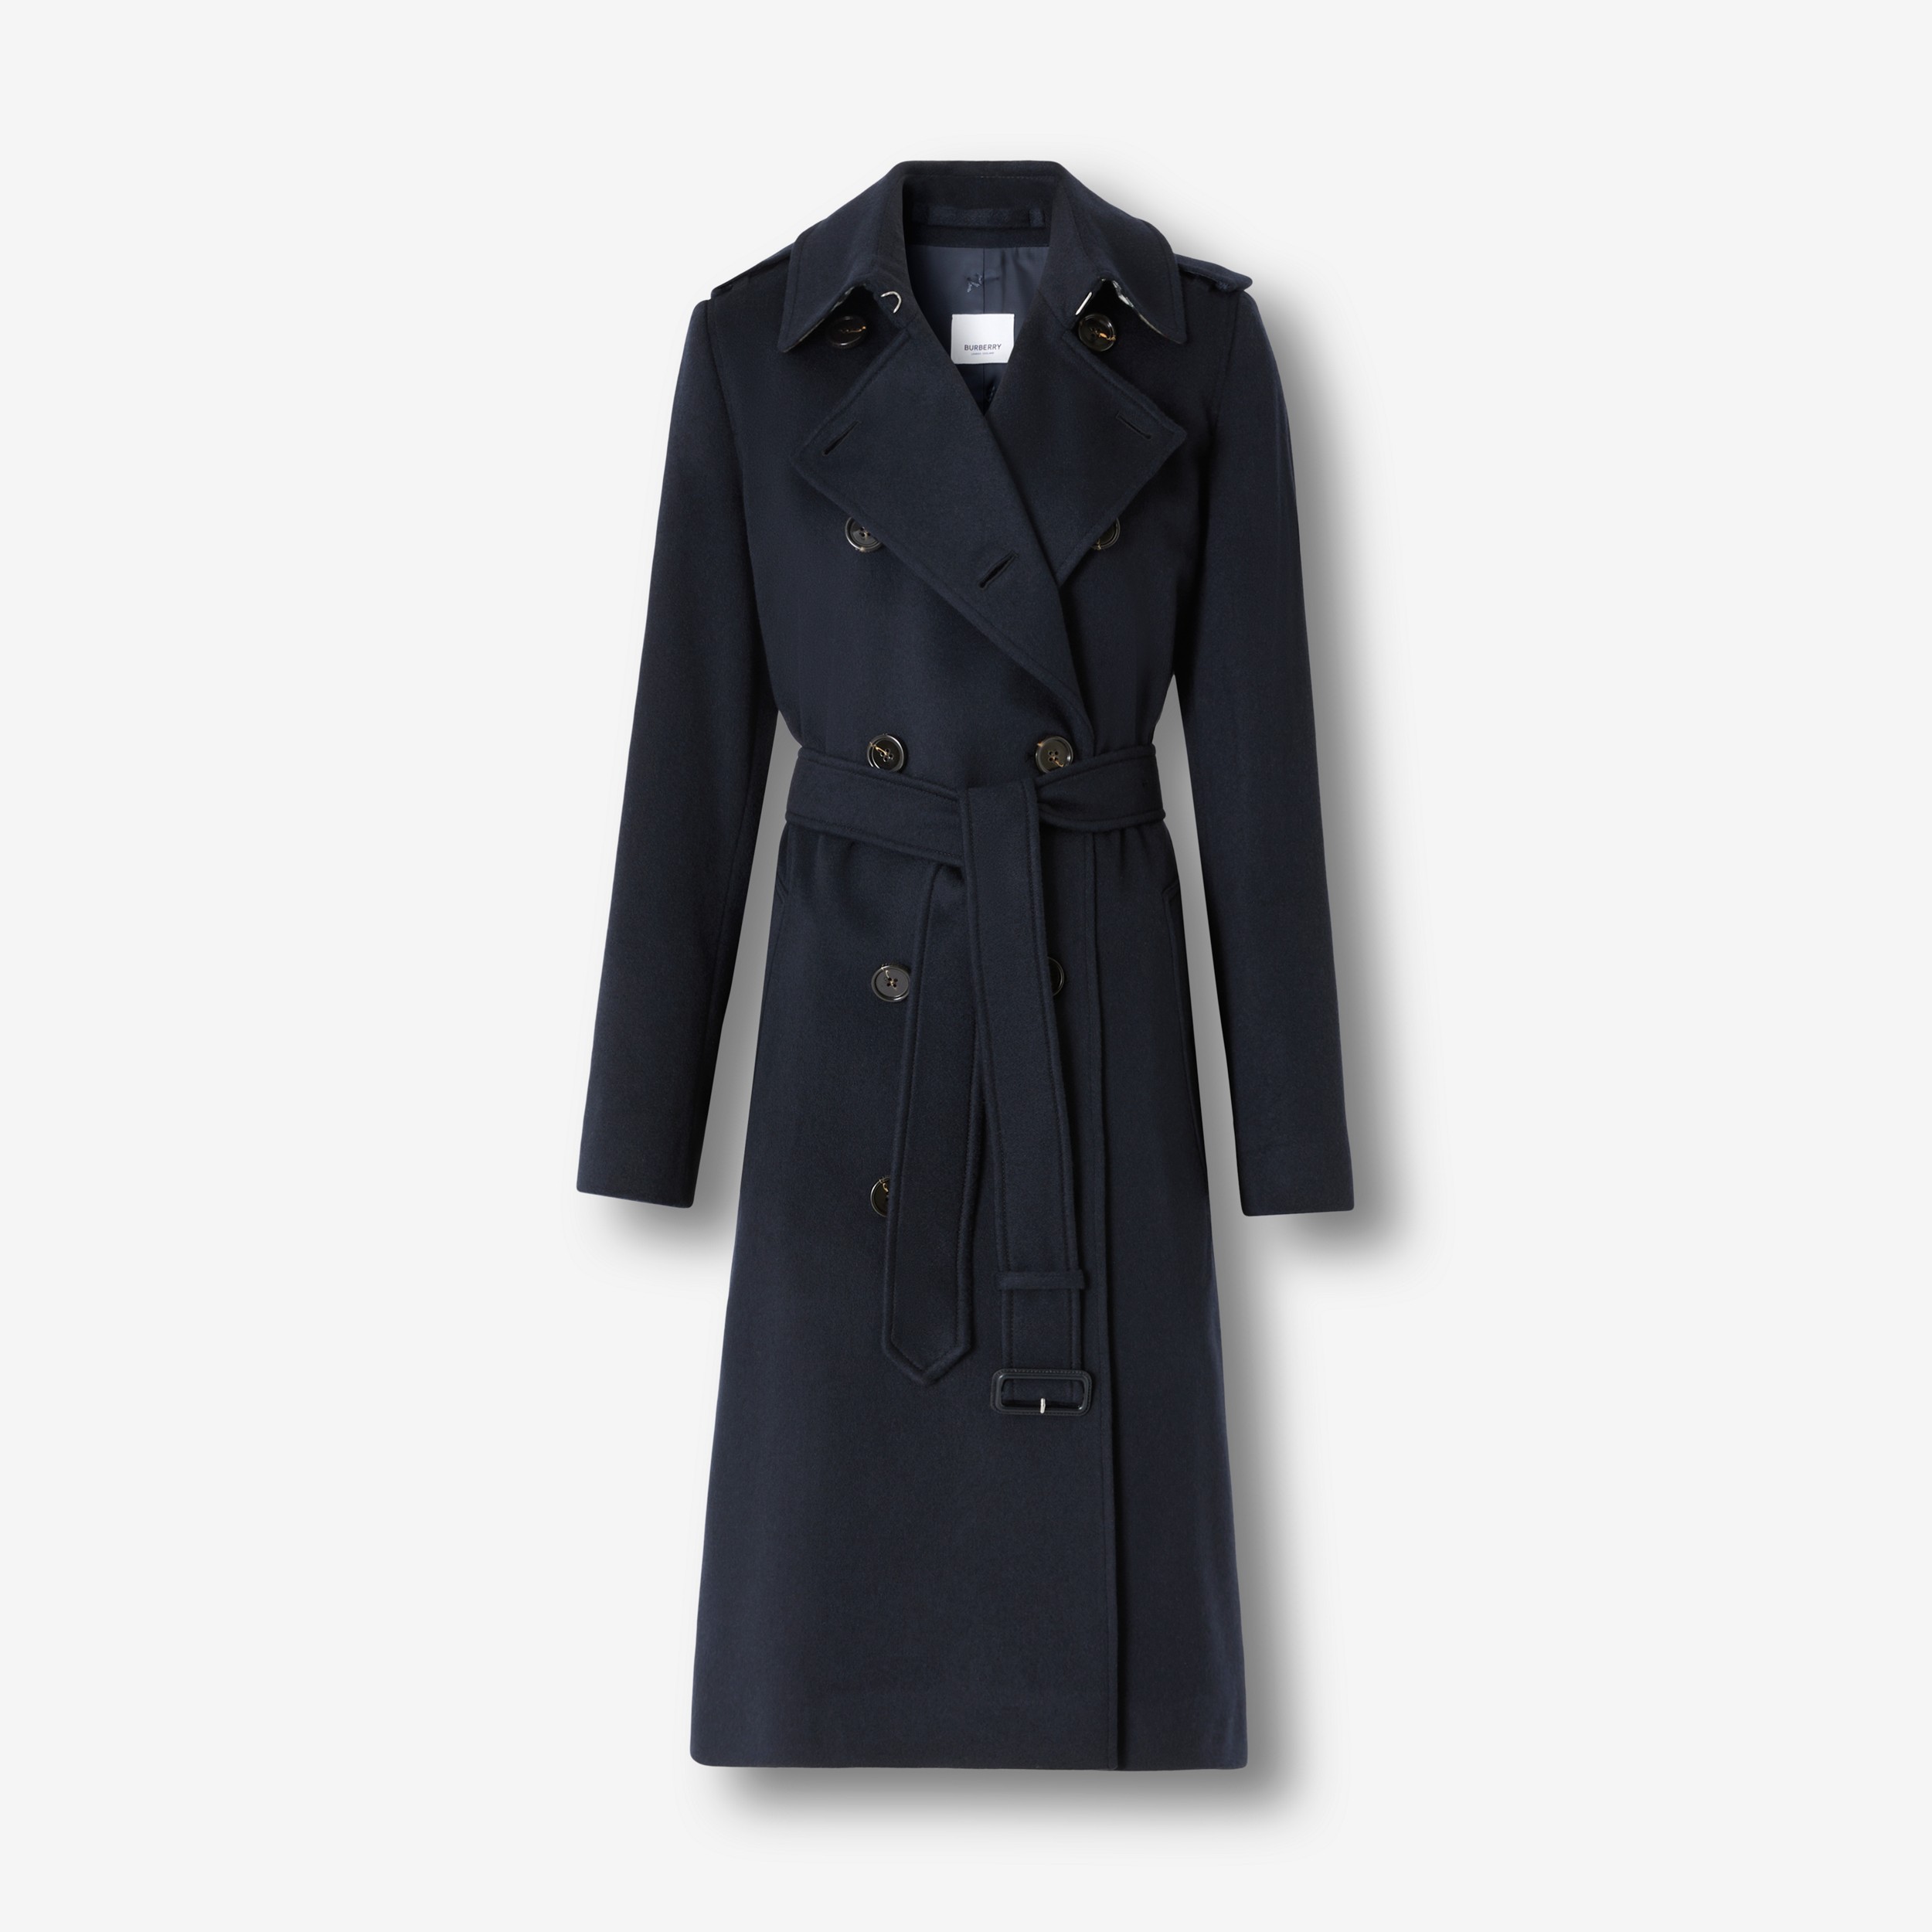 louter Onbemand Prime Cashmere Kensington Trench Coat in Dark Charcoal Blue - Women | Burberry®  Official